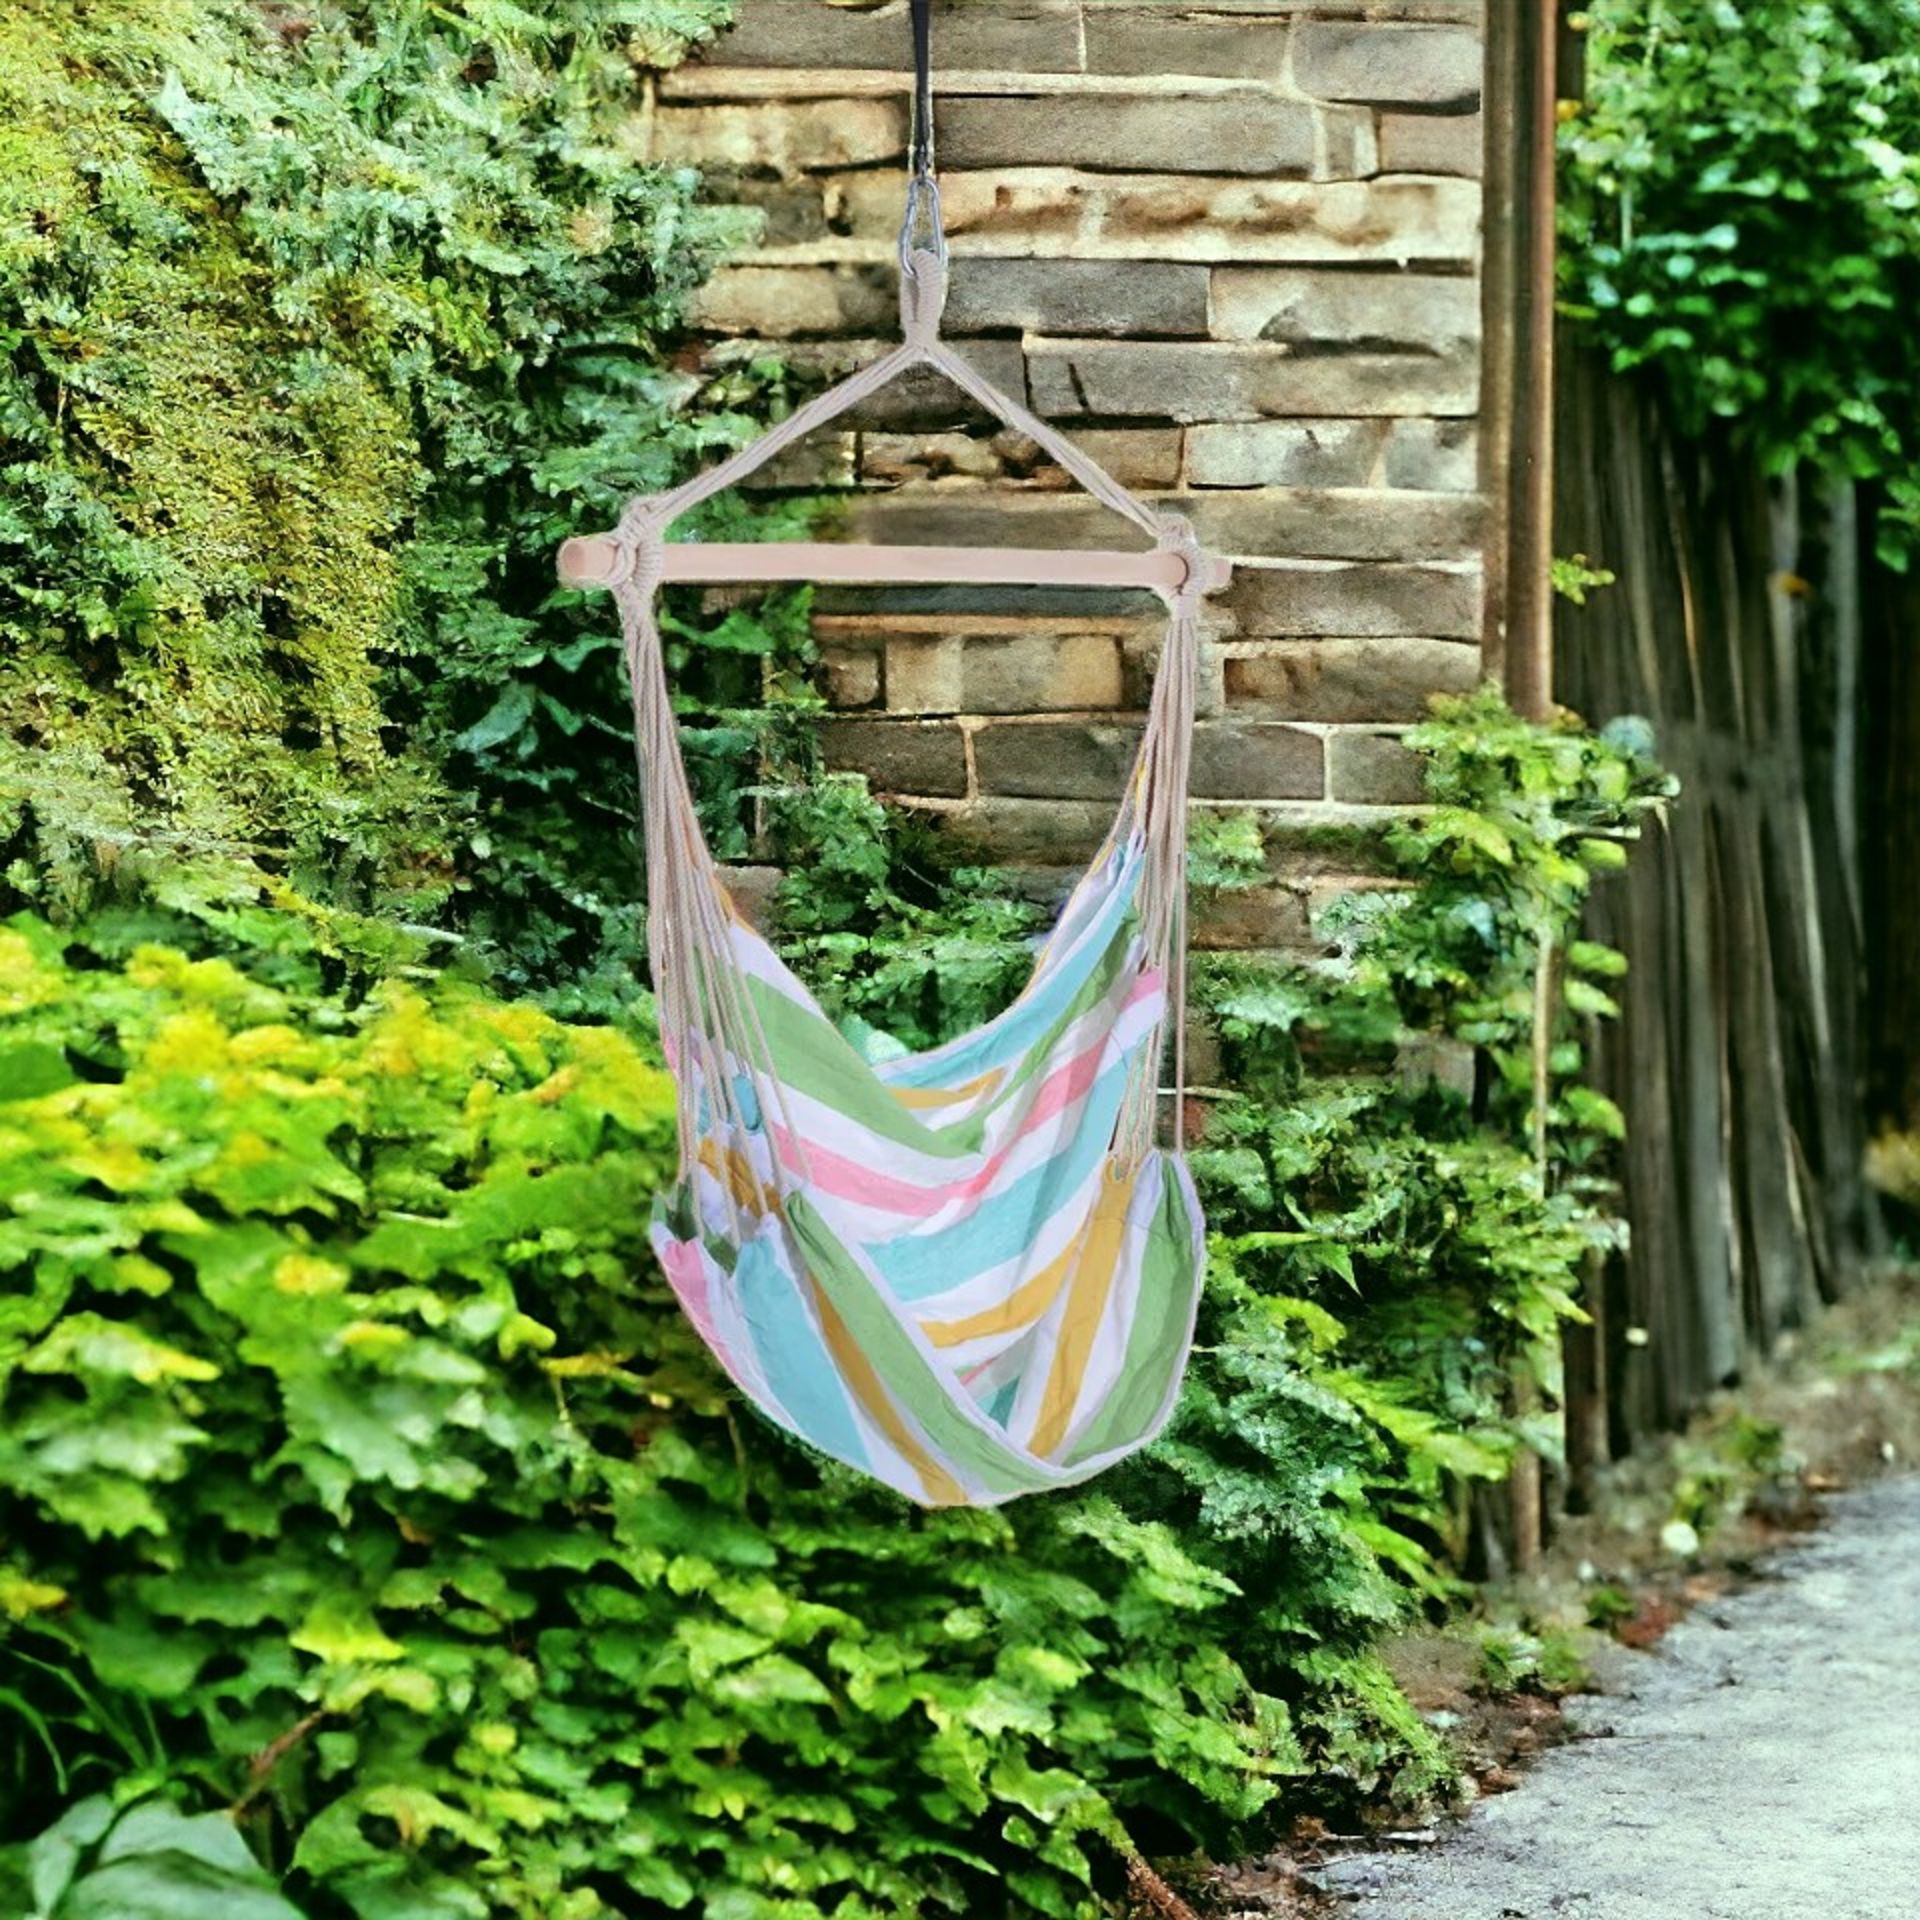 FREE DELIVERY -BRAND NEW GARDEN HAMMOCK CHAIR YARD HANGING ROPE COTTON CLOTH W/ ROPES GREEN - Image 2 of 2